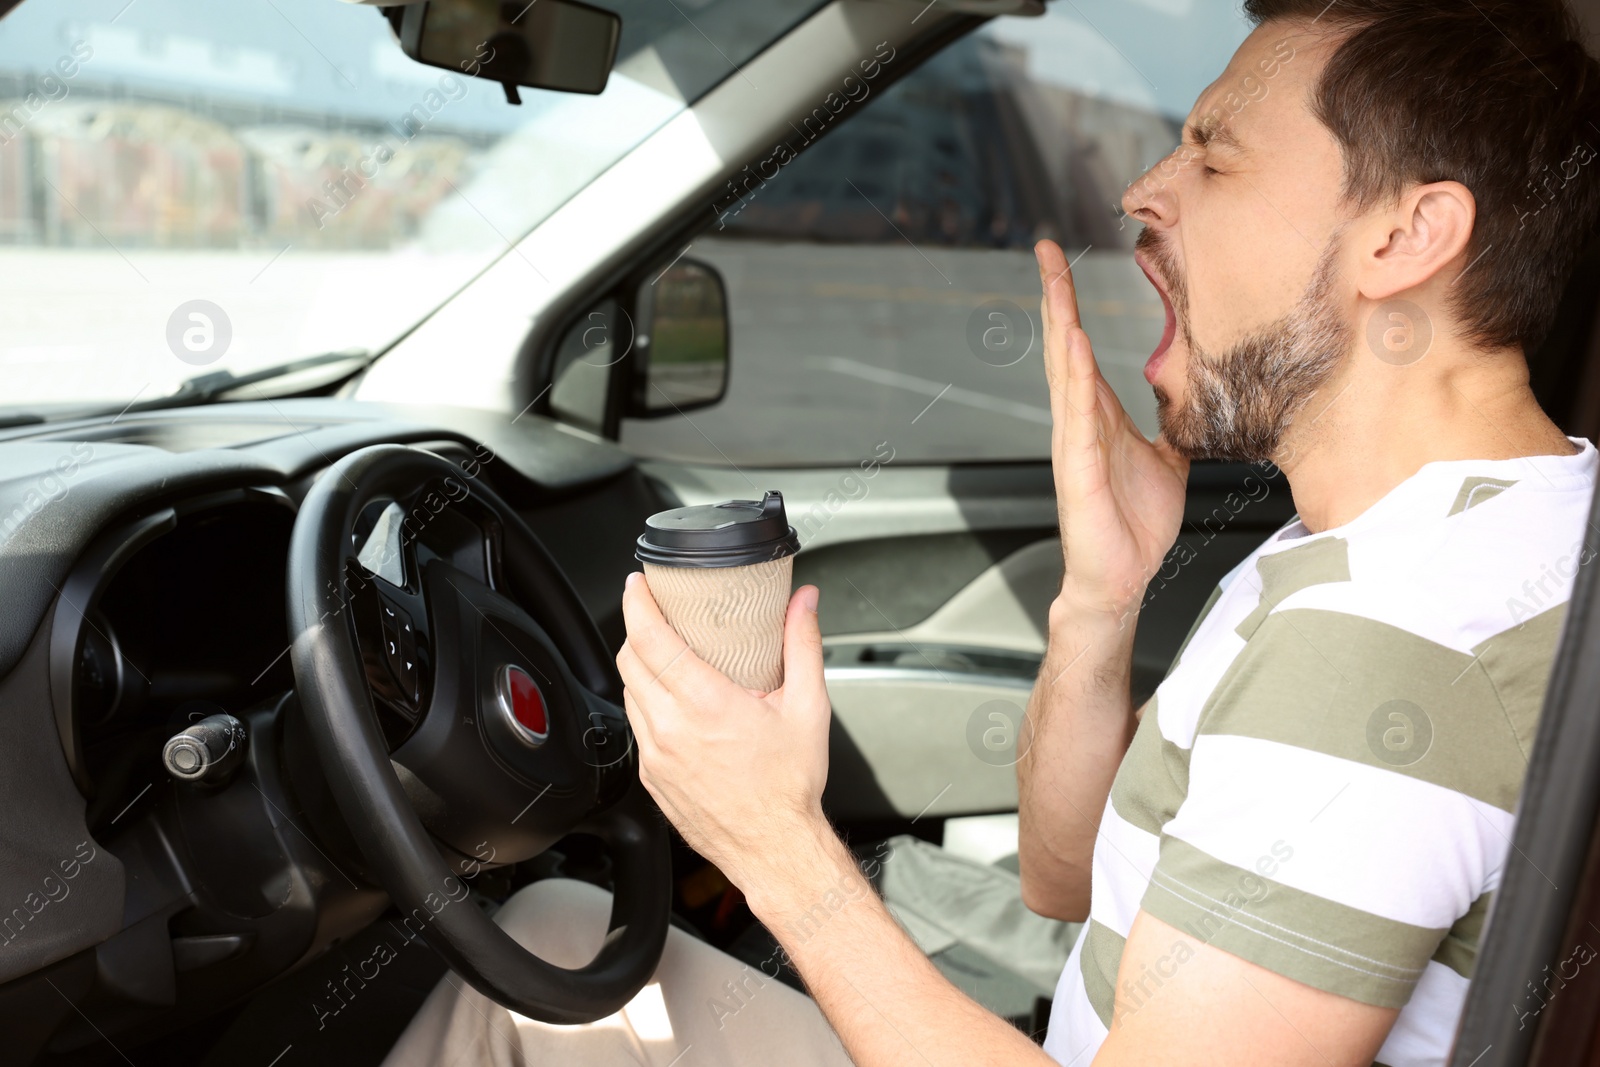 Photo of Sleepy man with cup of coffee yawning in modern car